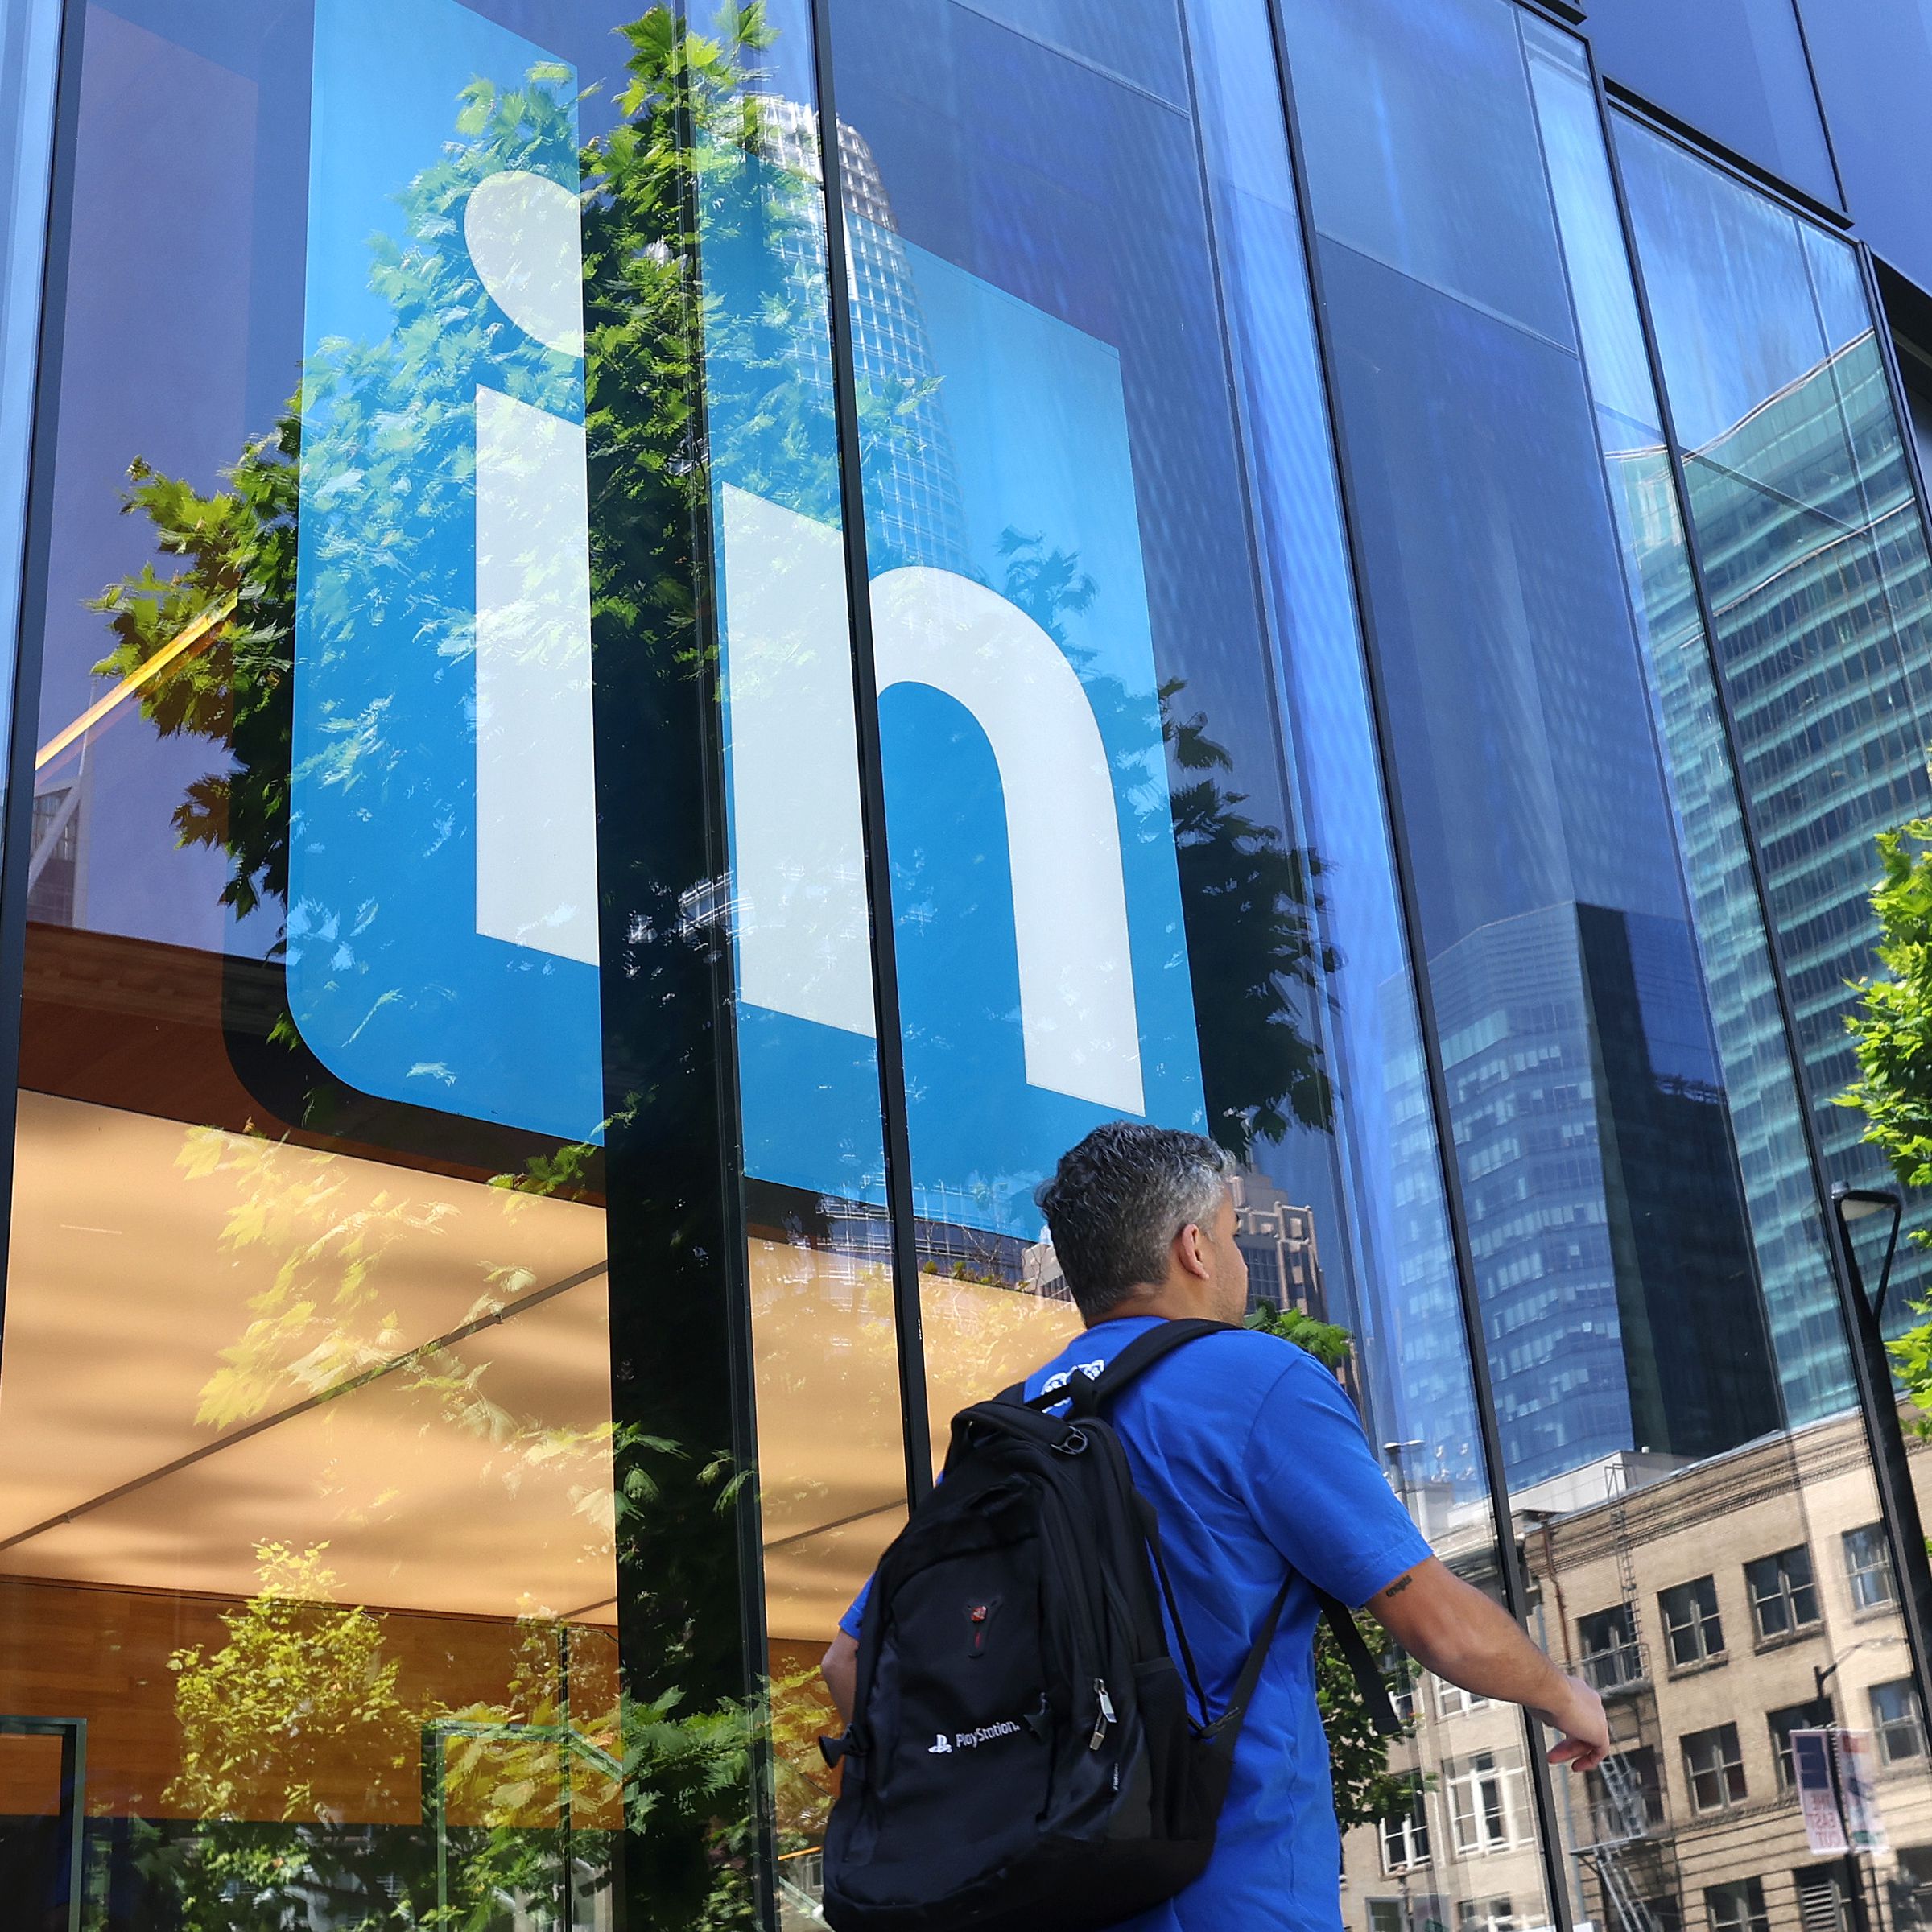 A pedestrian walks by a sign at a LinkedIn office on July 26, 2023 in San Francisco, California. LinkedIn announced plans to cut nearly 200 jobs at offices in the San Francisco Bay Area. The cuts follow 700 layoffs earlier in the year.